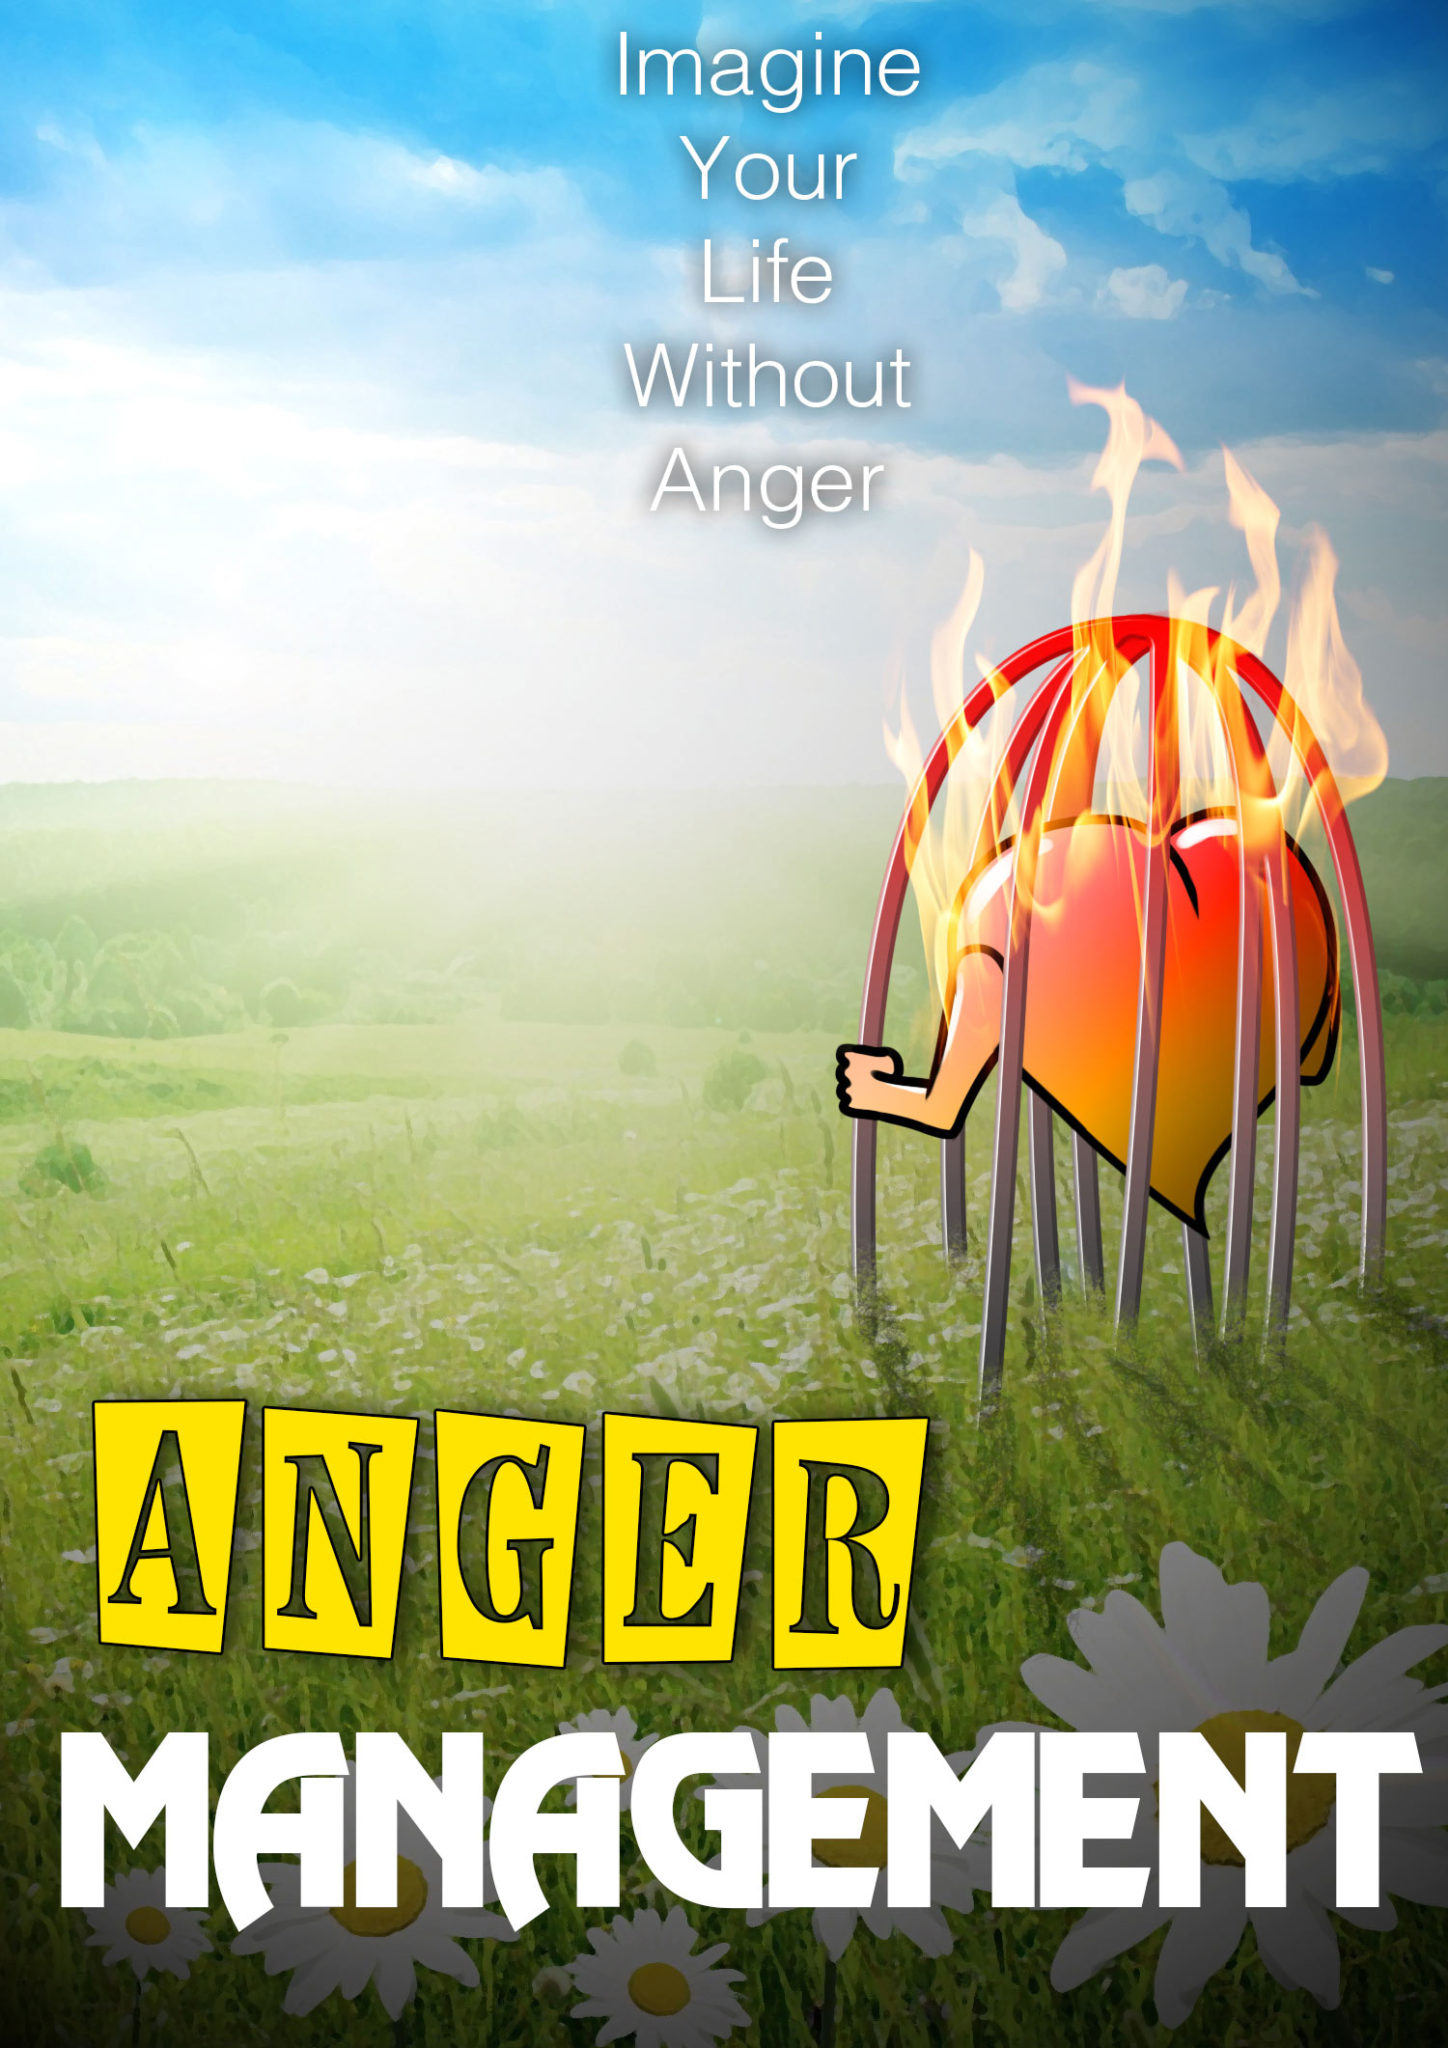 FREE: Anger Management: Imagine Your Life Without Anger by Cedric Grace